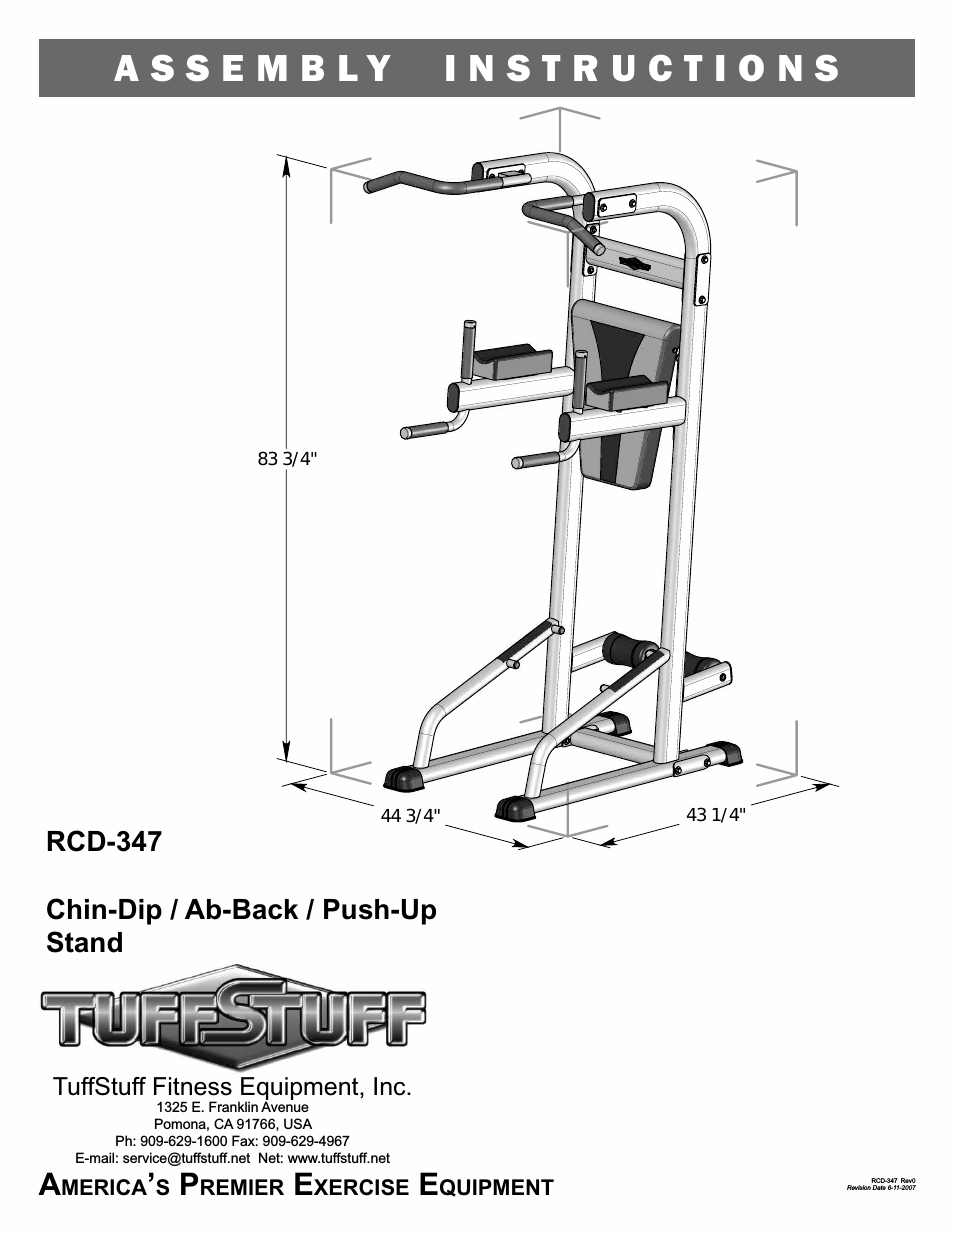 RCD-347 Chin/Dip/VKR & Push-Up Combo